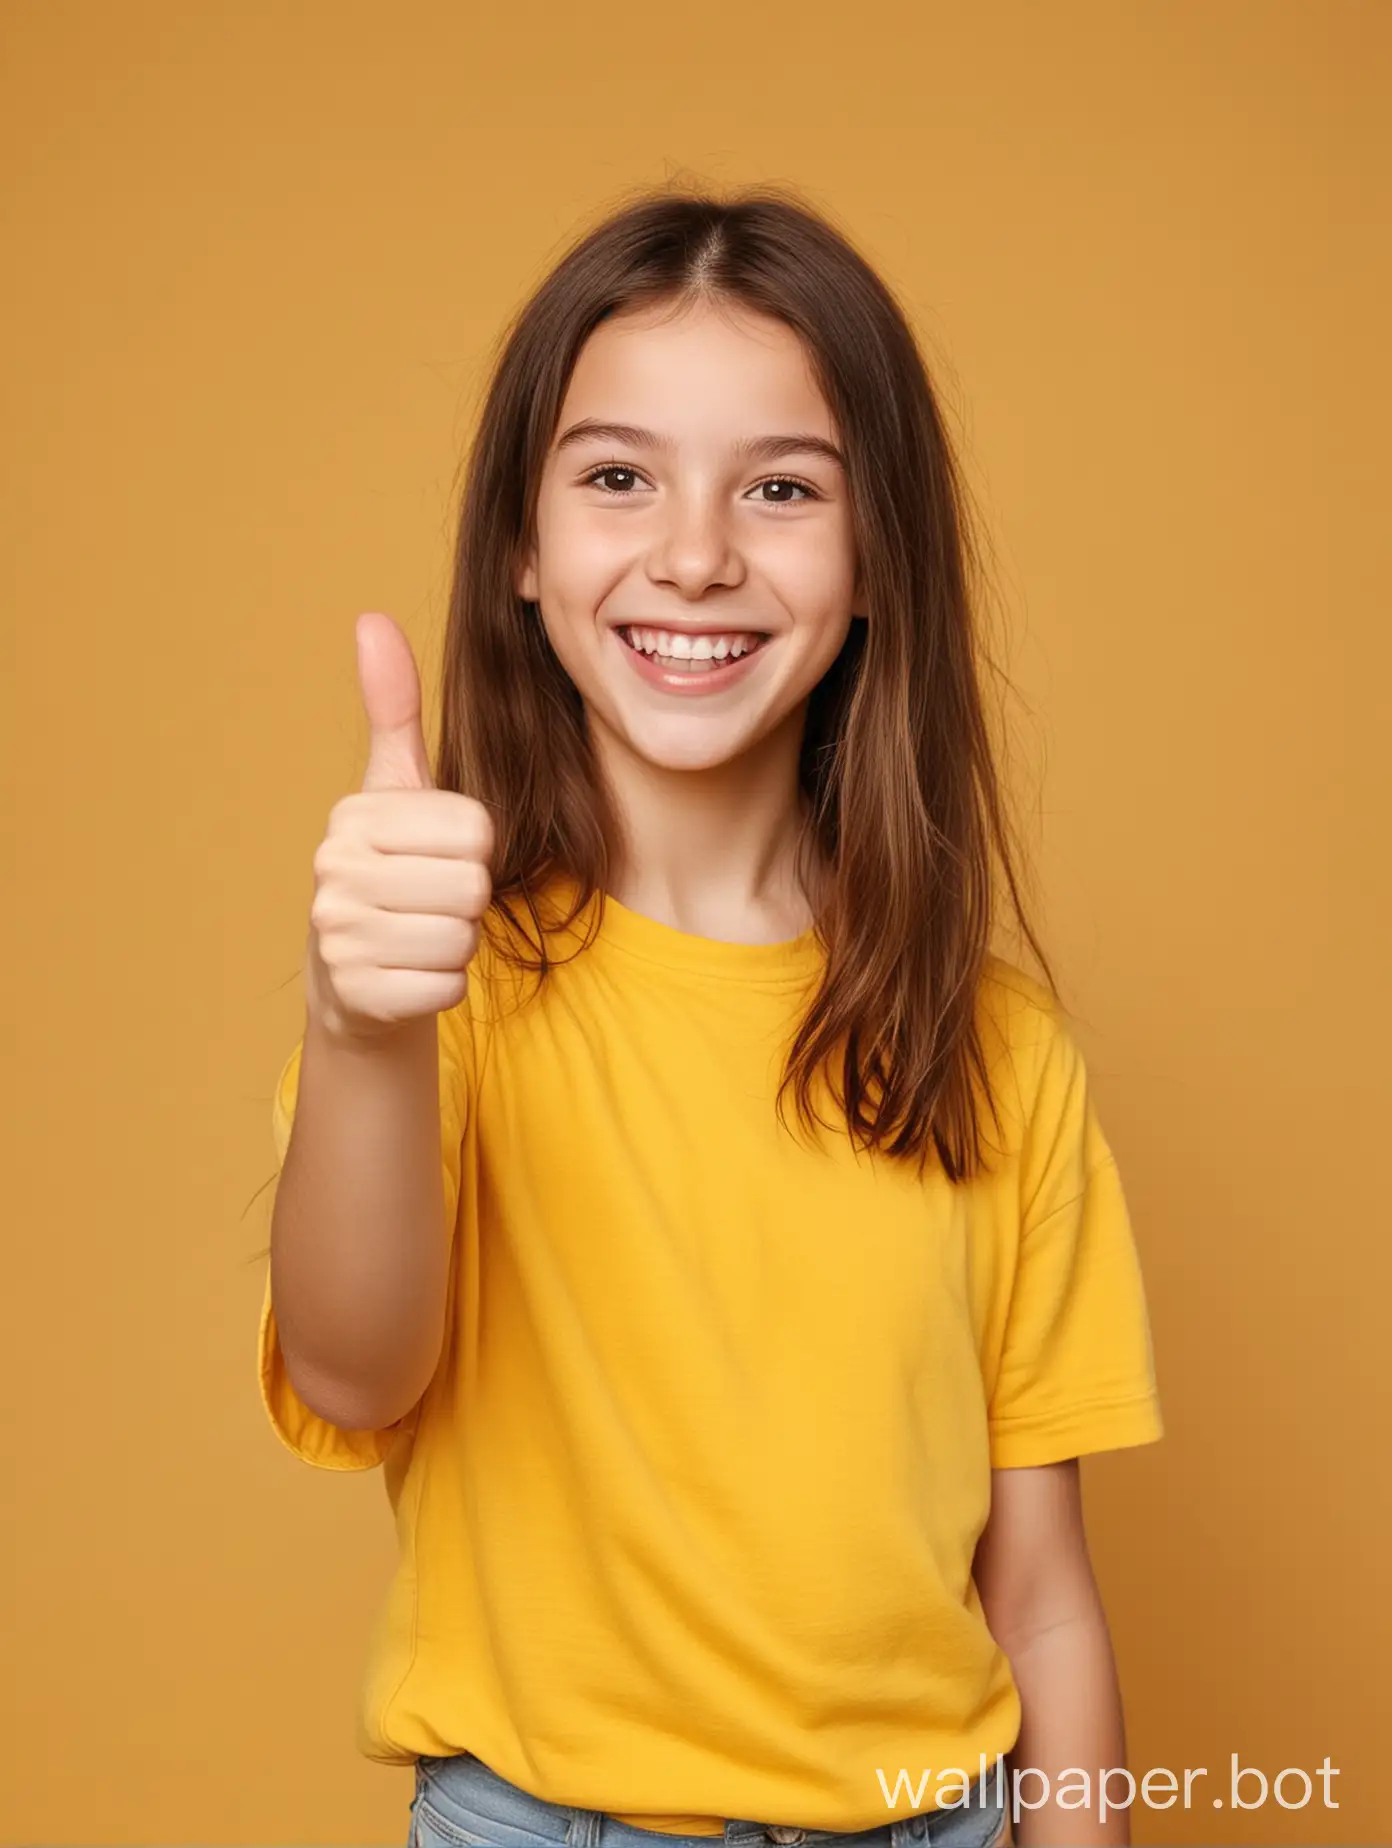 Delighted-Girl-Showing-Thumbs-Up-on-Yellow-Background